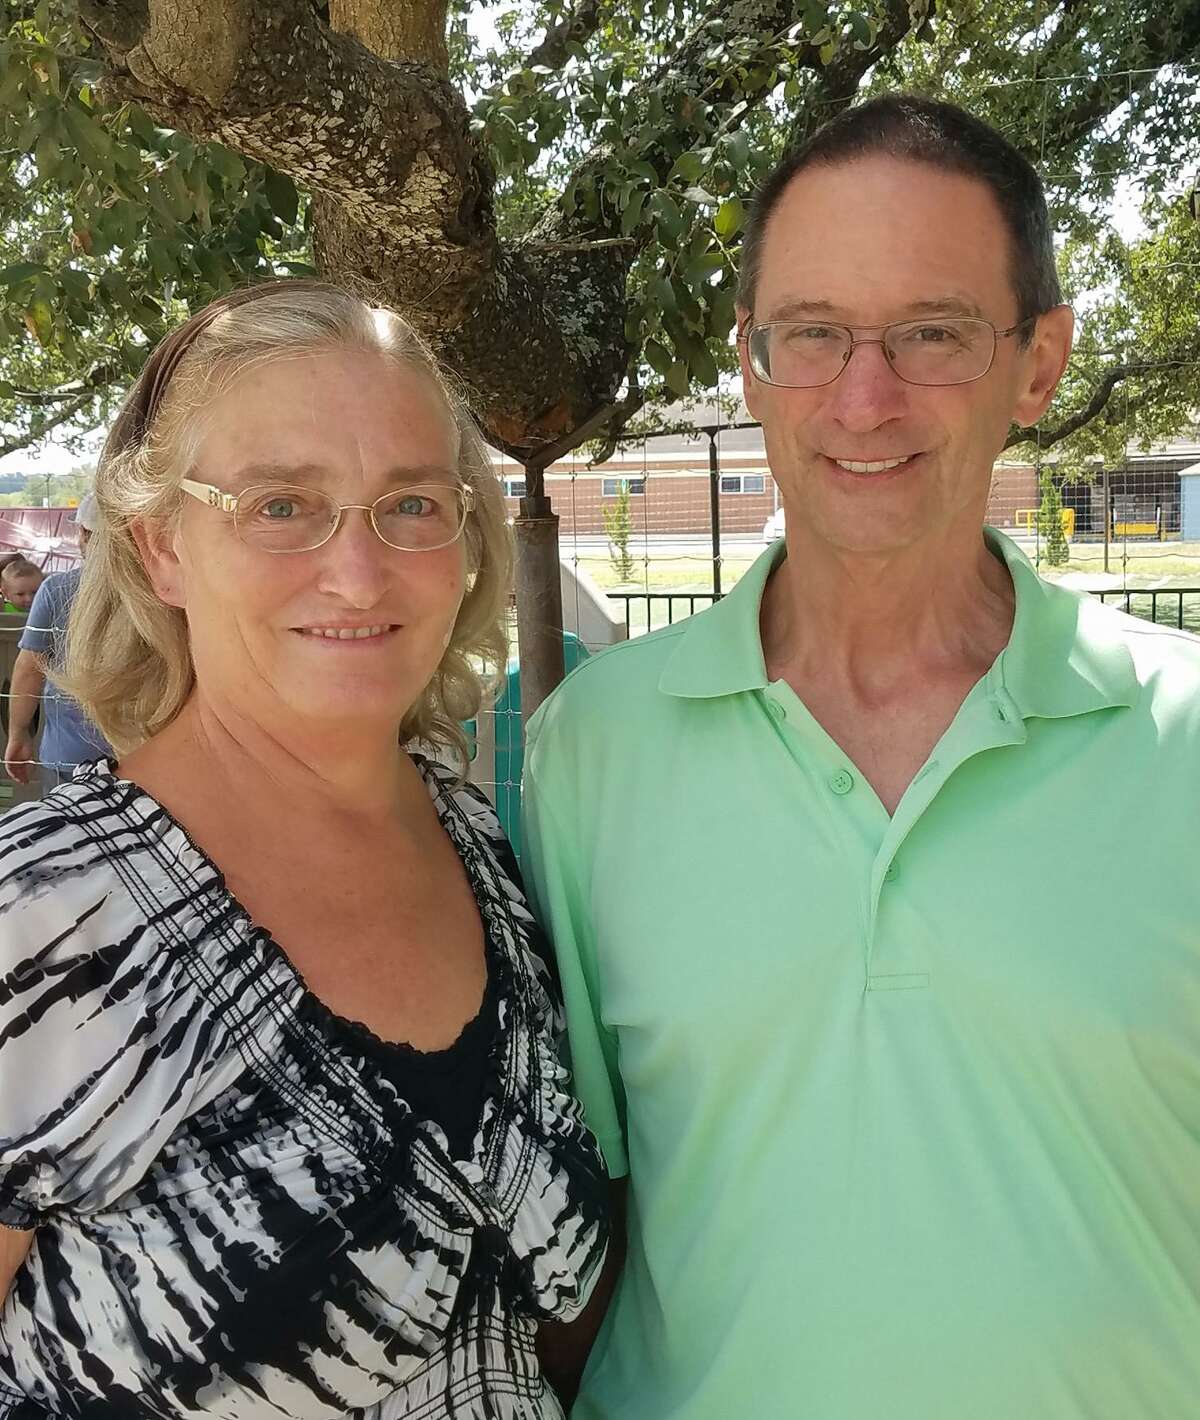 Keith and Debbie Braden in 2016. They were both in the First Baptist Church in Sutherland Springs on Sunday, November 5, 2017 when Devin Kelley began shooting. Debbie and a grandchild survived. Keith did not.